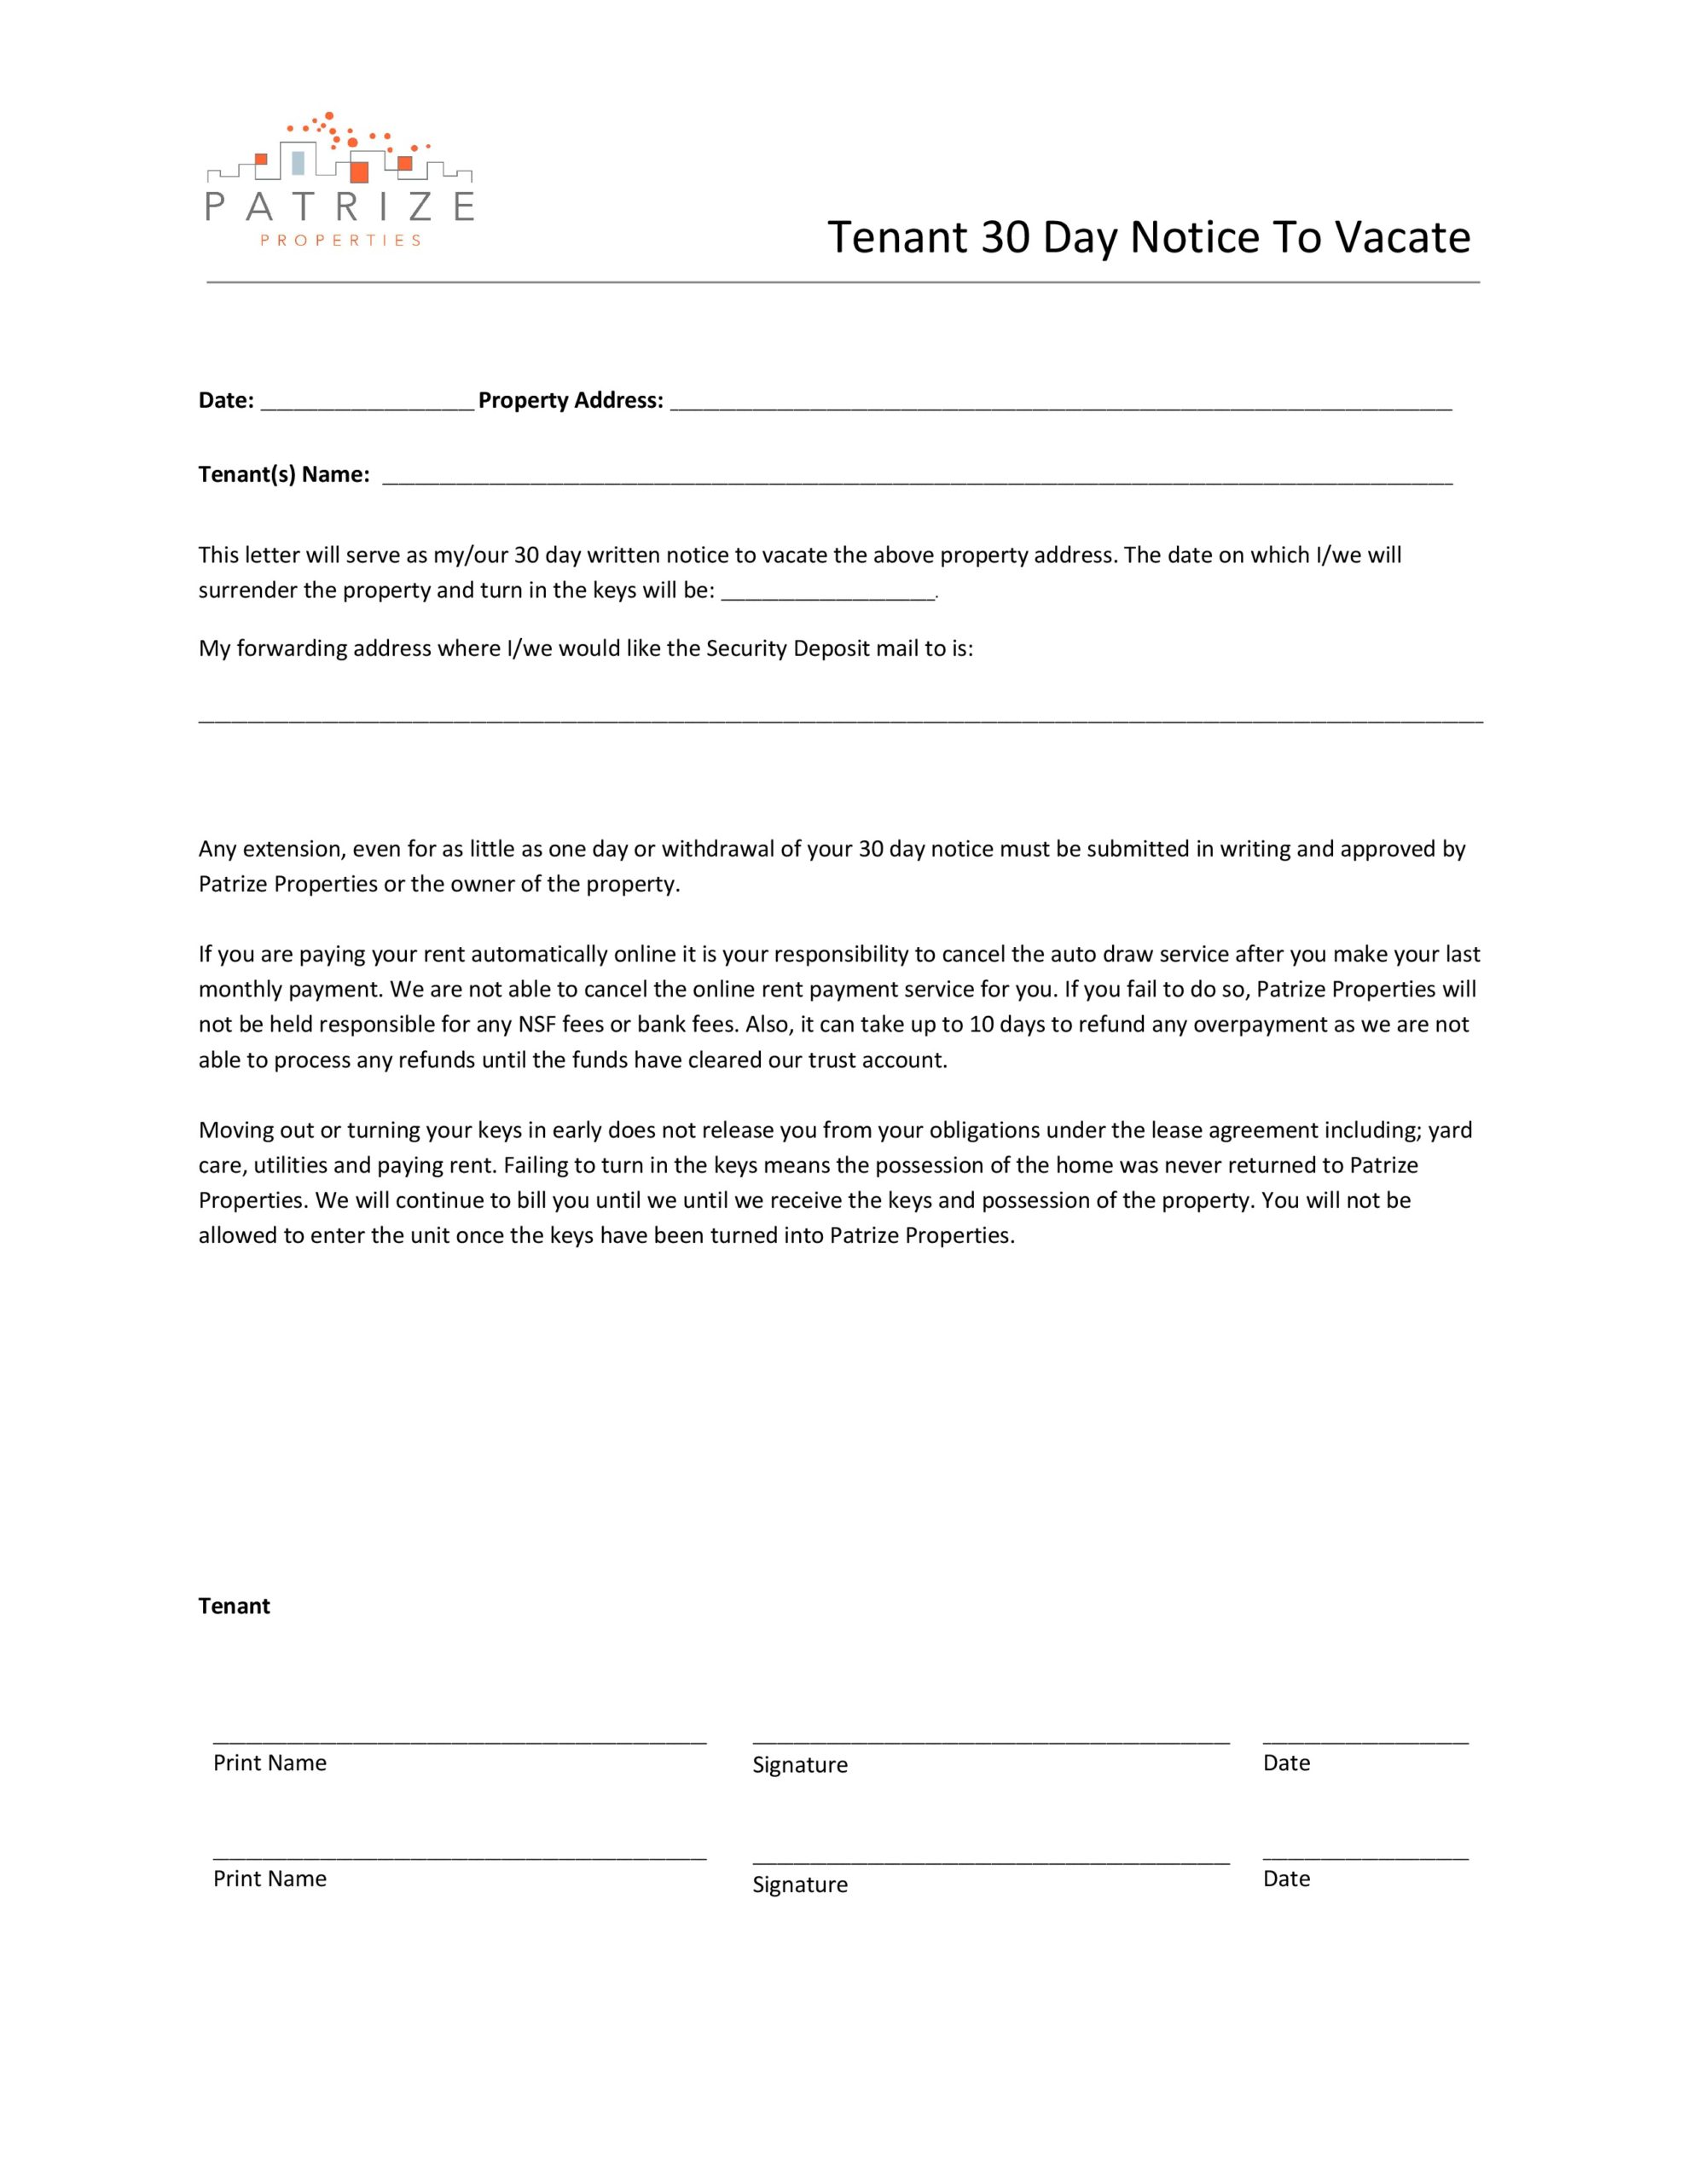 30 Day Notice Tenant To Landlord Letter from templatelab.com